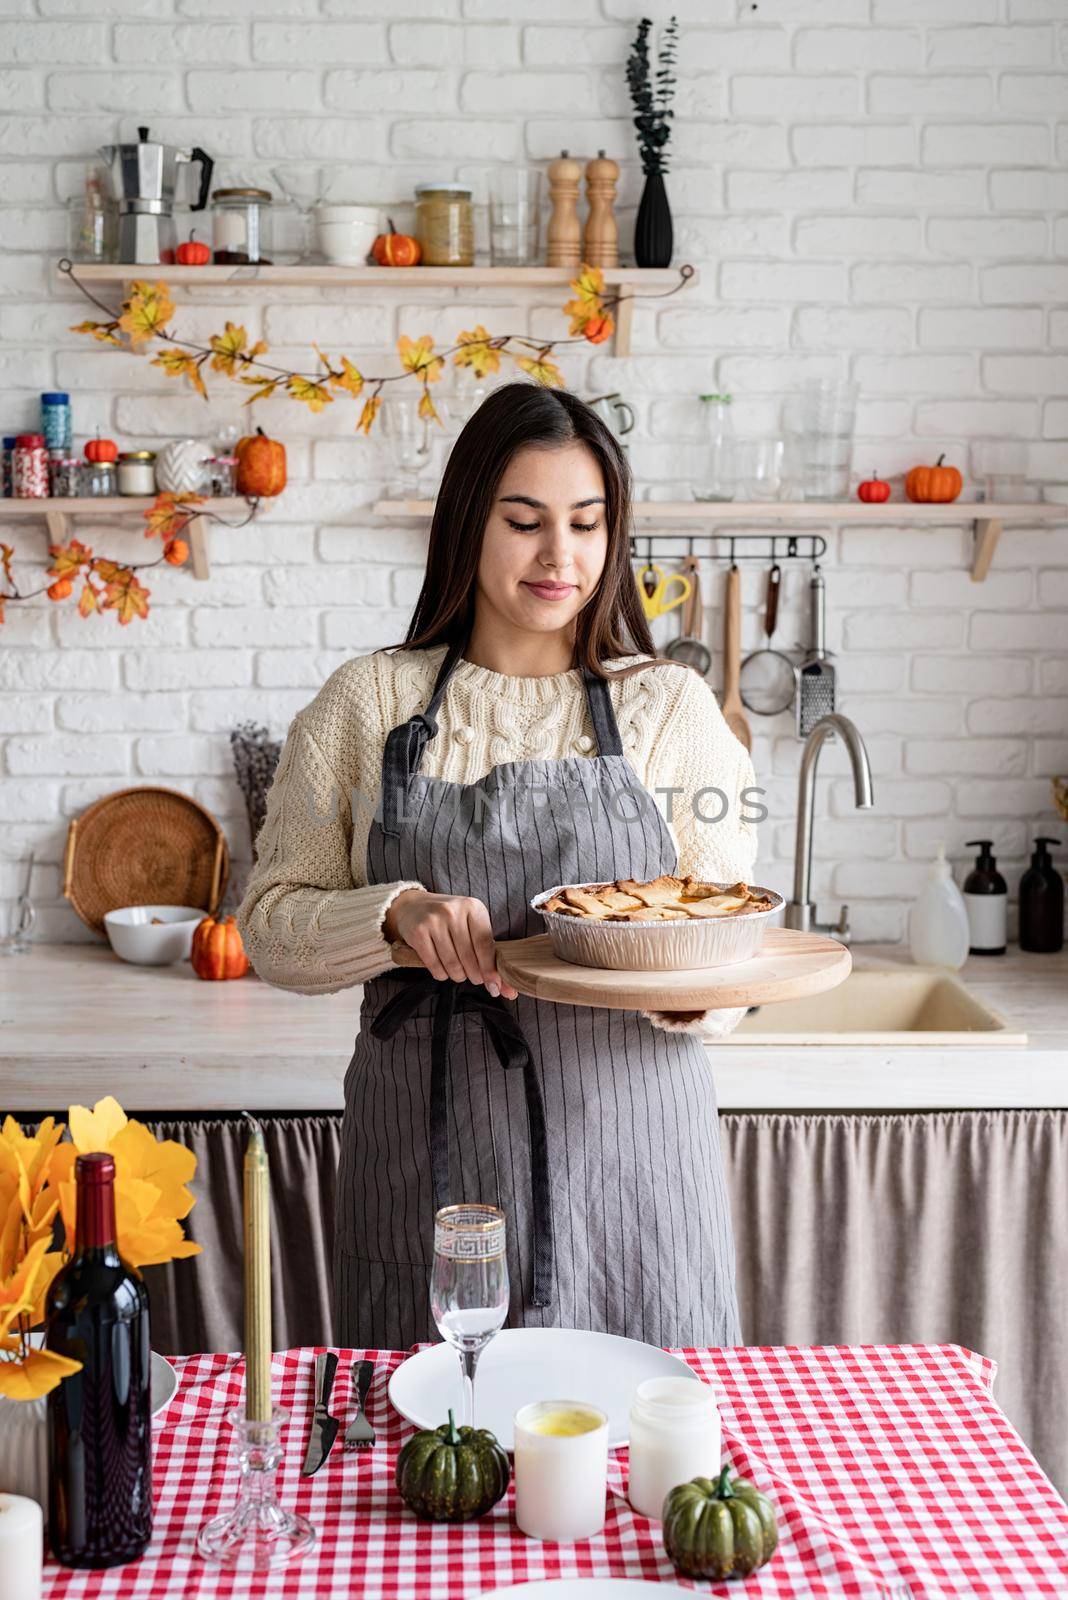 Happy Thanksgiving Day. Autumn feast. Woman celebrating holiday cooking traditional dinner at kitchen